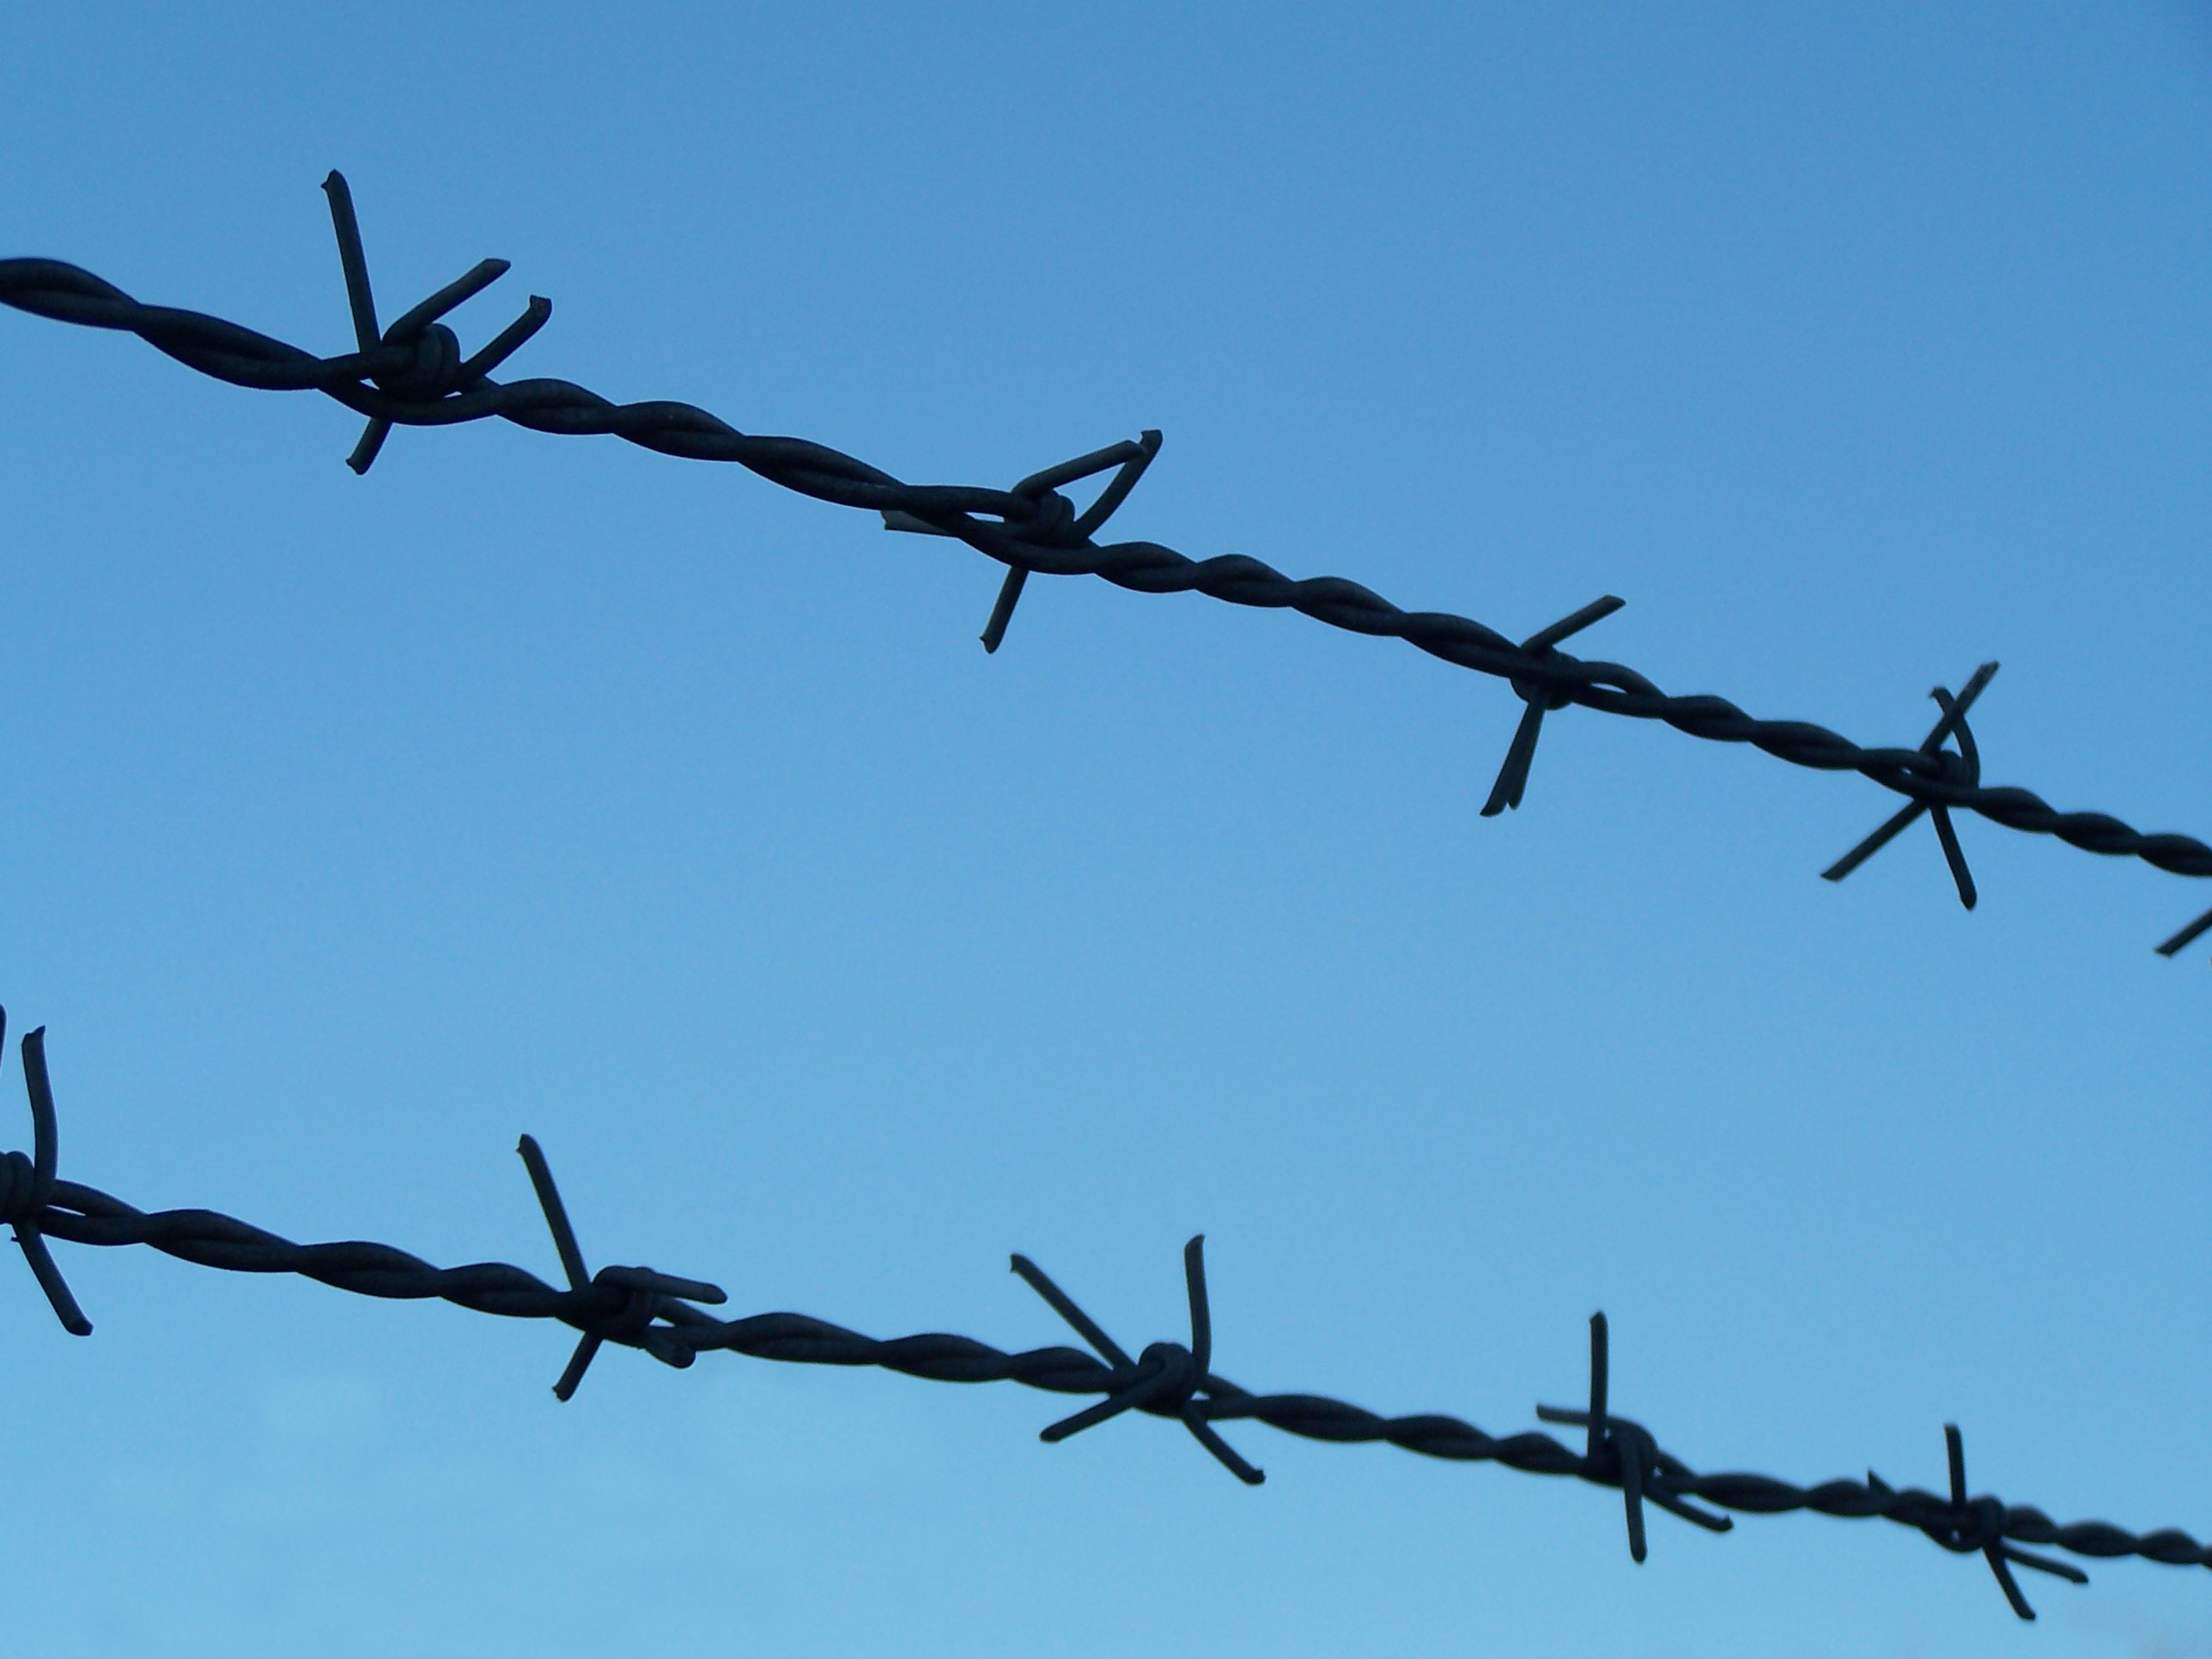 File:Barbed wire in the sky.jpg - Wikimedia Commons